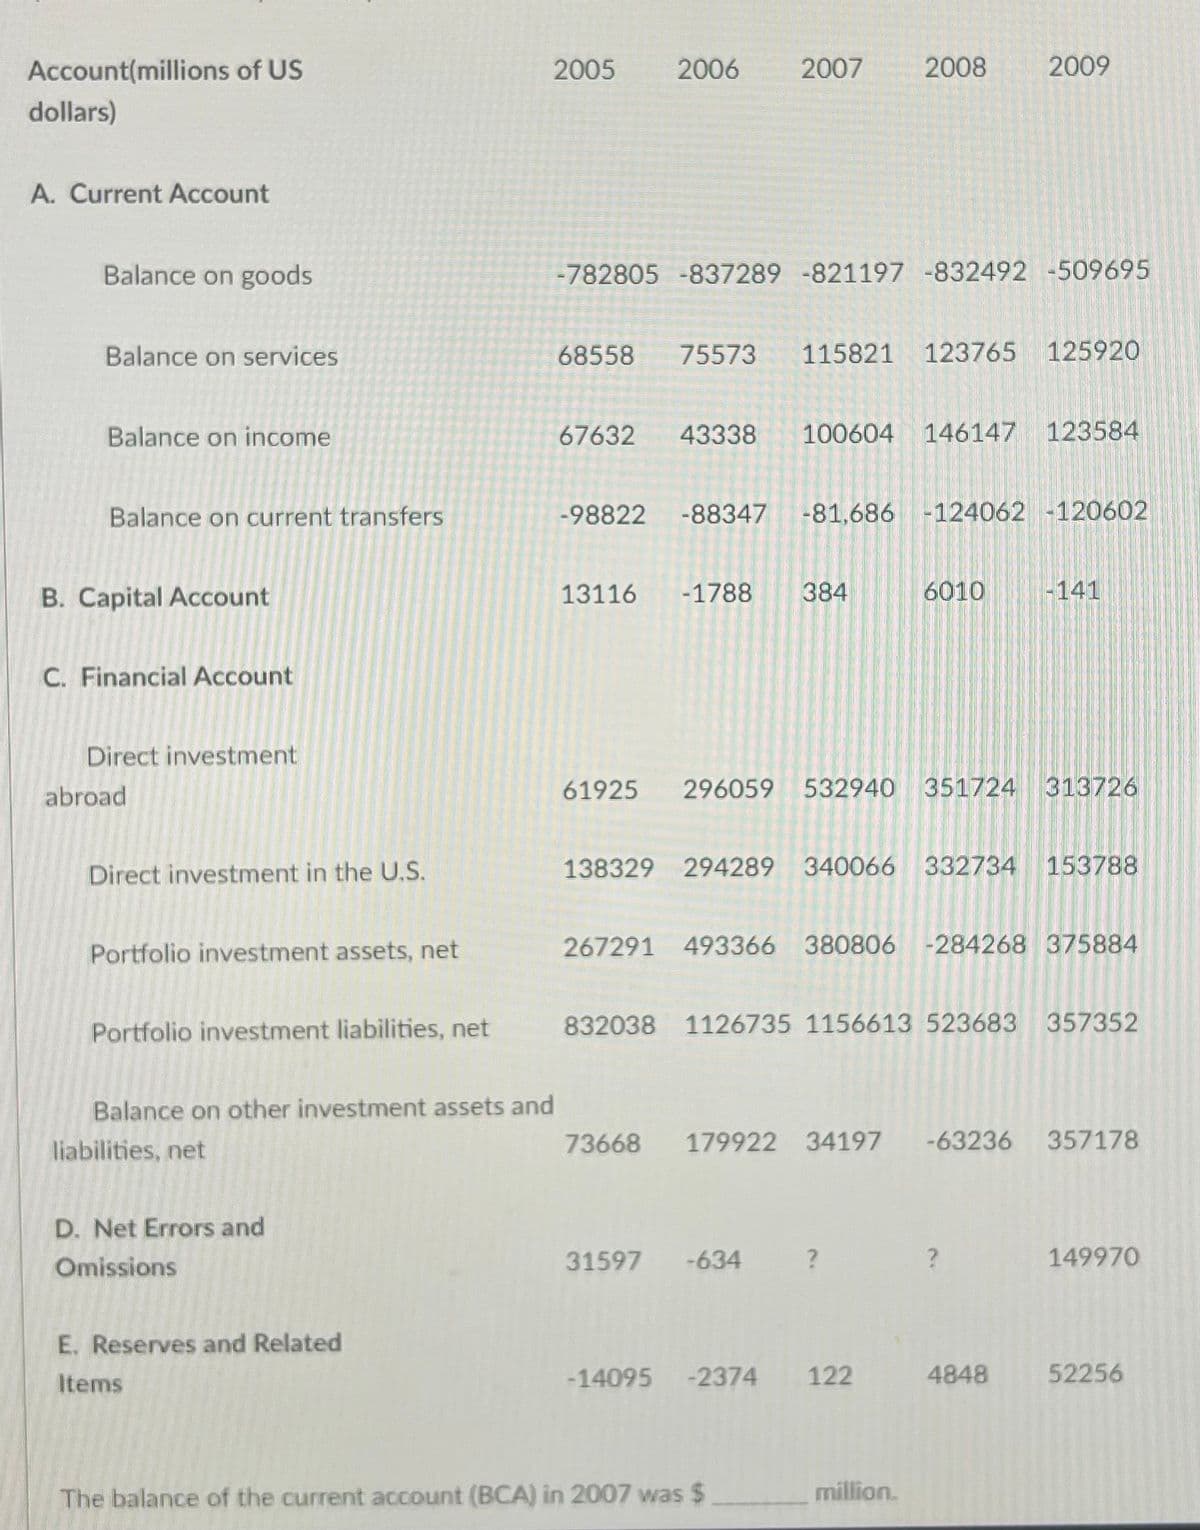 Account(millions of US
dollars)
A. Current Account
Balance on goods
Balance on services
Balance on income
Balance on current transfers
B. Capital Account
C. Financial Account
Direct investment
abroad
Direct investment in the U.S.
Portfolio investment assets, net
Portfolio investment liabilities, net
Balance on other investment assets and
liabilities, net
D. Net Errors and
Omissions
E. Reserves and Related
Items
2005
2006
-782805 -837289 -821197 -832492 -509695
2007
68558 75573 115821 123765 125920
13116 -1788
67632 43338 100604 146147 123584
-98822 -88347 -81,686 -124062 -120602
73668
2008
384
61925 296059 532940 351724 313726
31597 -634
2009
138329 294289 340066 332734 153788
267291 493366 380806 -284268 375884
The balance of the current account (BCA) in 2007 was $
6010
832038 1126735 1156613 523683 357352
?
-14095 -2374 122
179922 34197 -63236 357178
-141
million.
4848
149970
52256